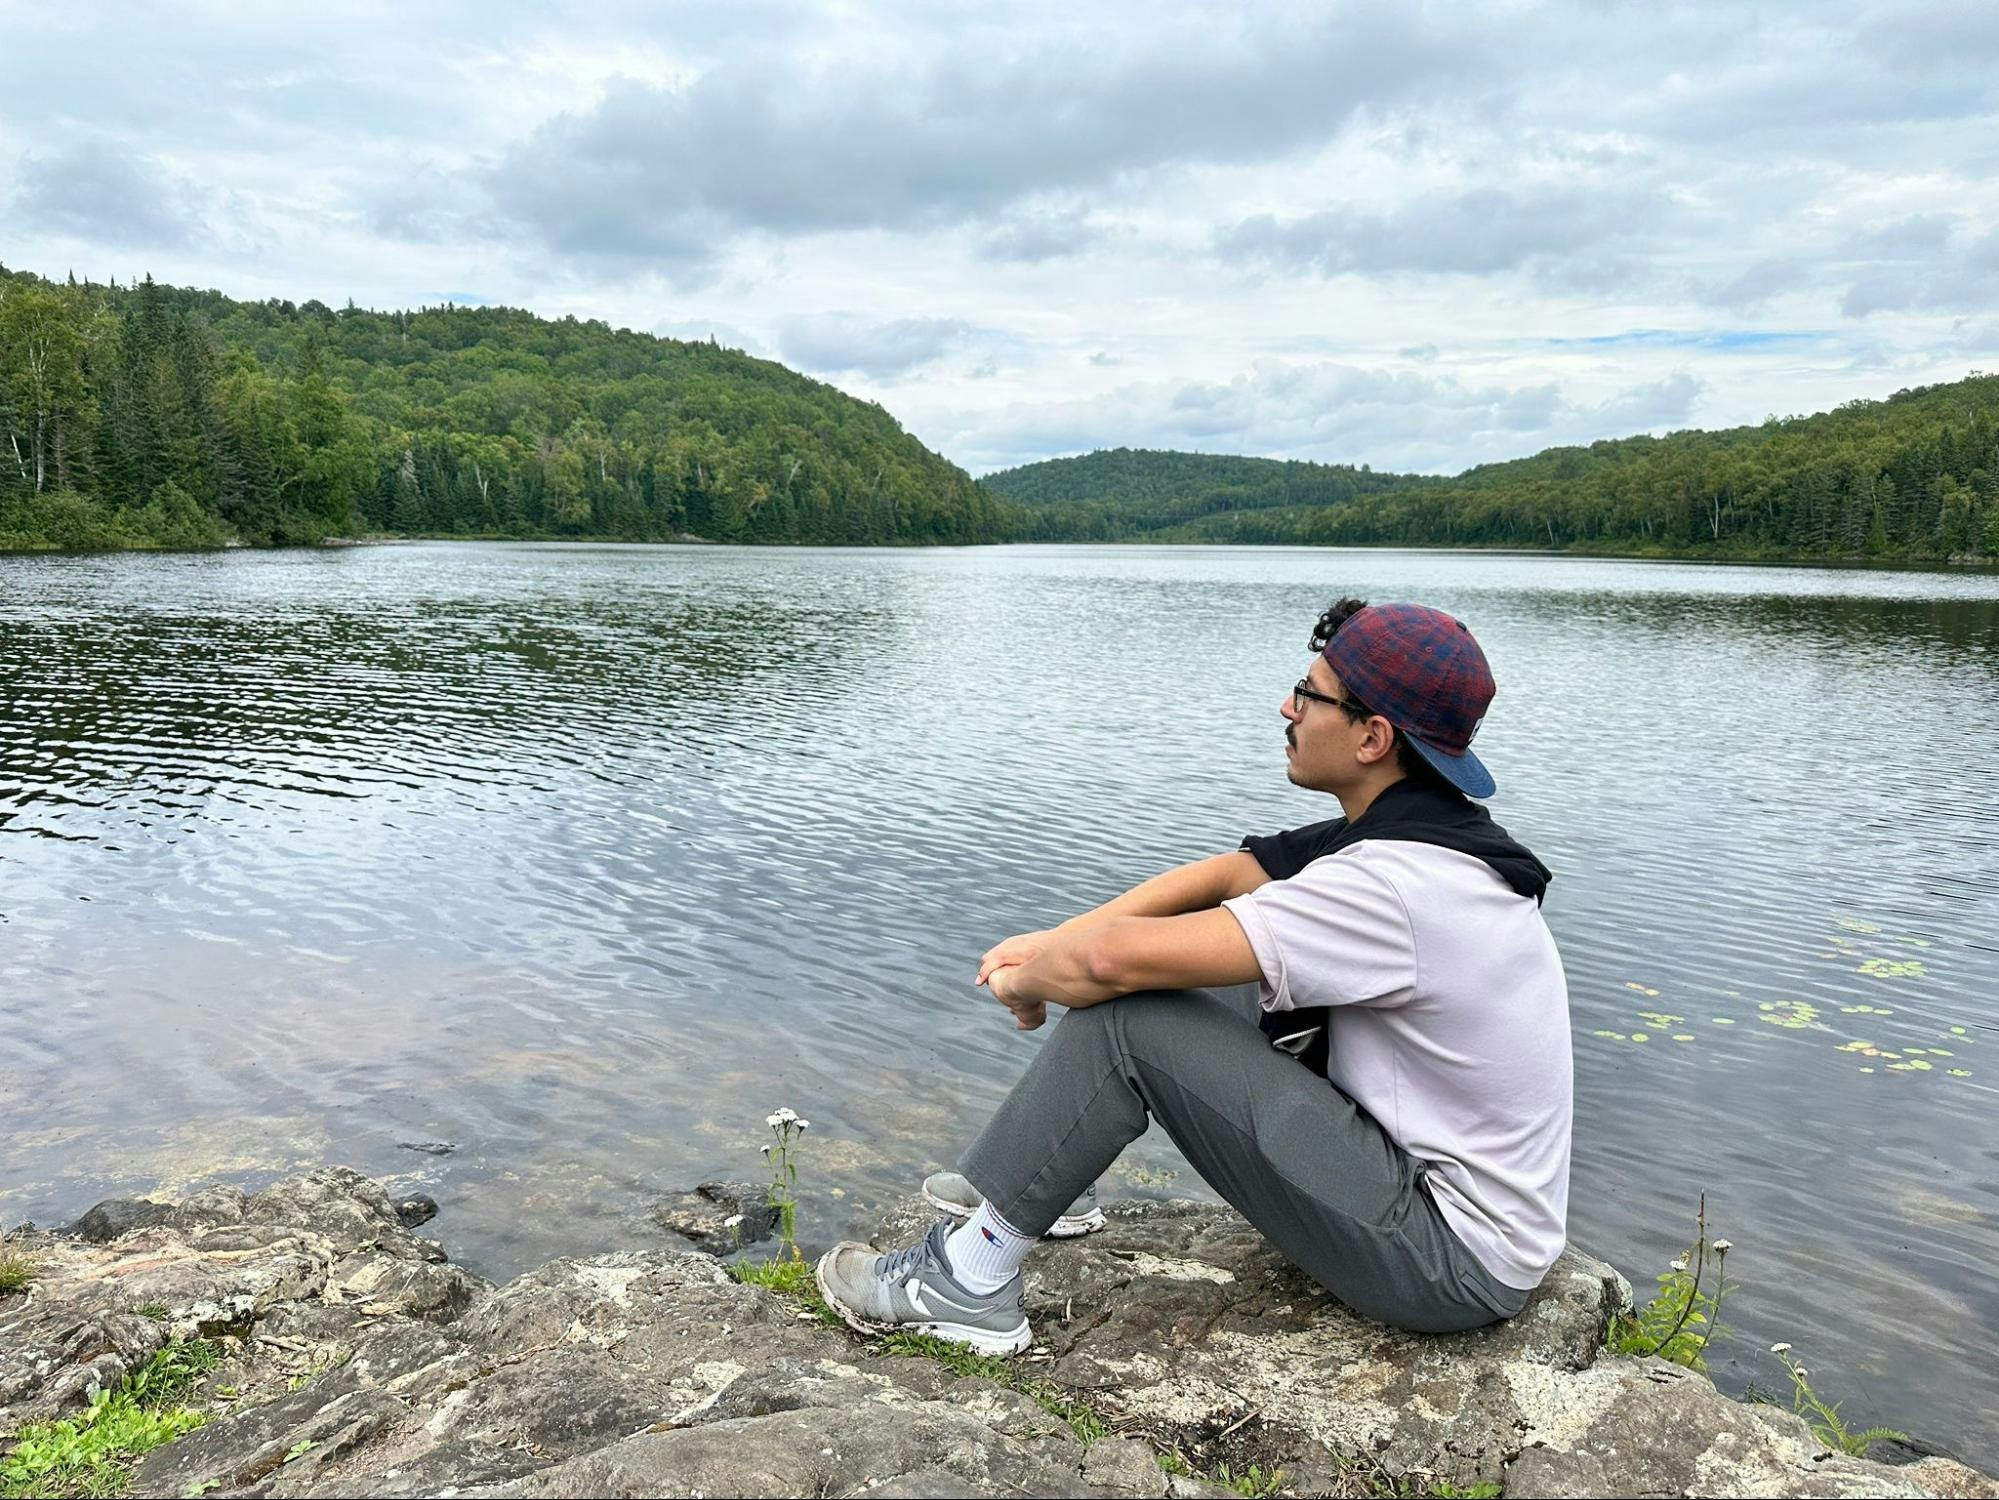 Malik outside on a hike. He is seated on the banks of a clear lake, with clouds and green mountains in the background.